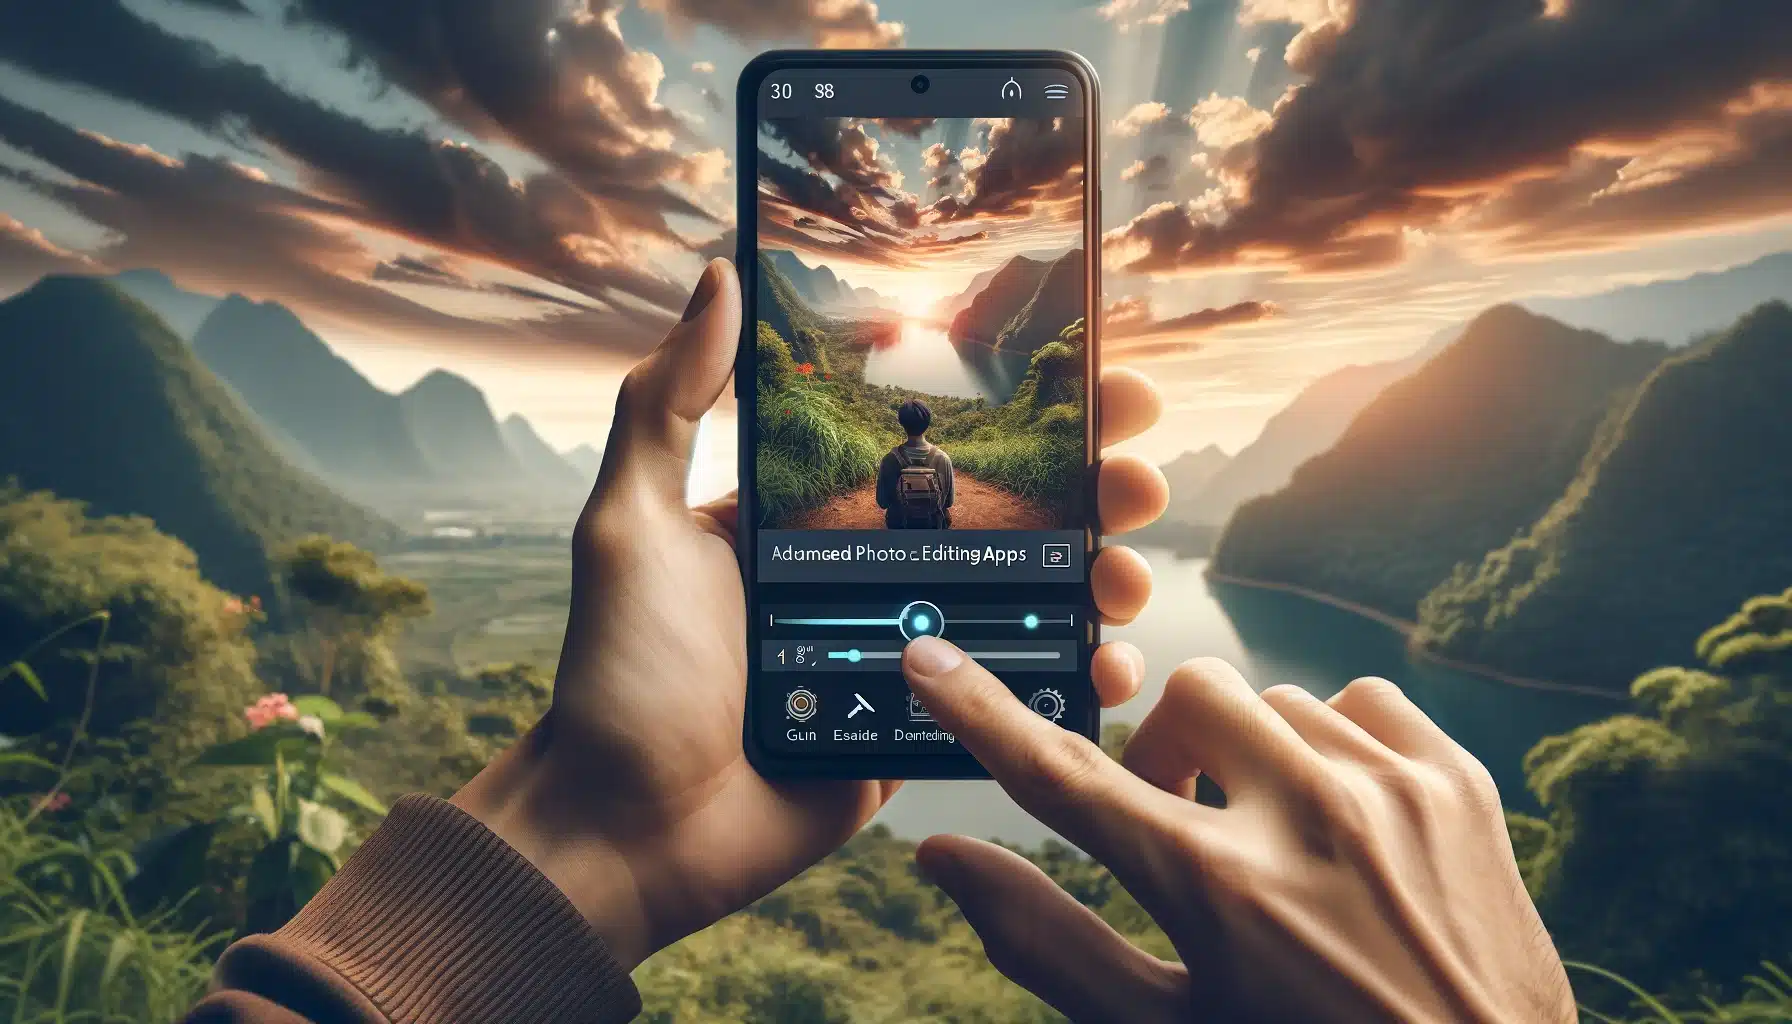 Person outdoors using a smartphone to edit a landscape photo on Best mobile photo editing apps, demonstrating the enhancement of photography through mobile apps.